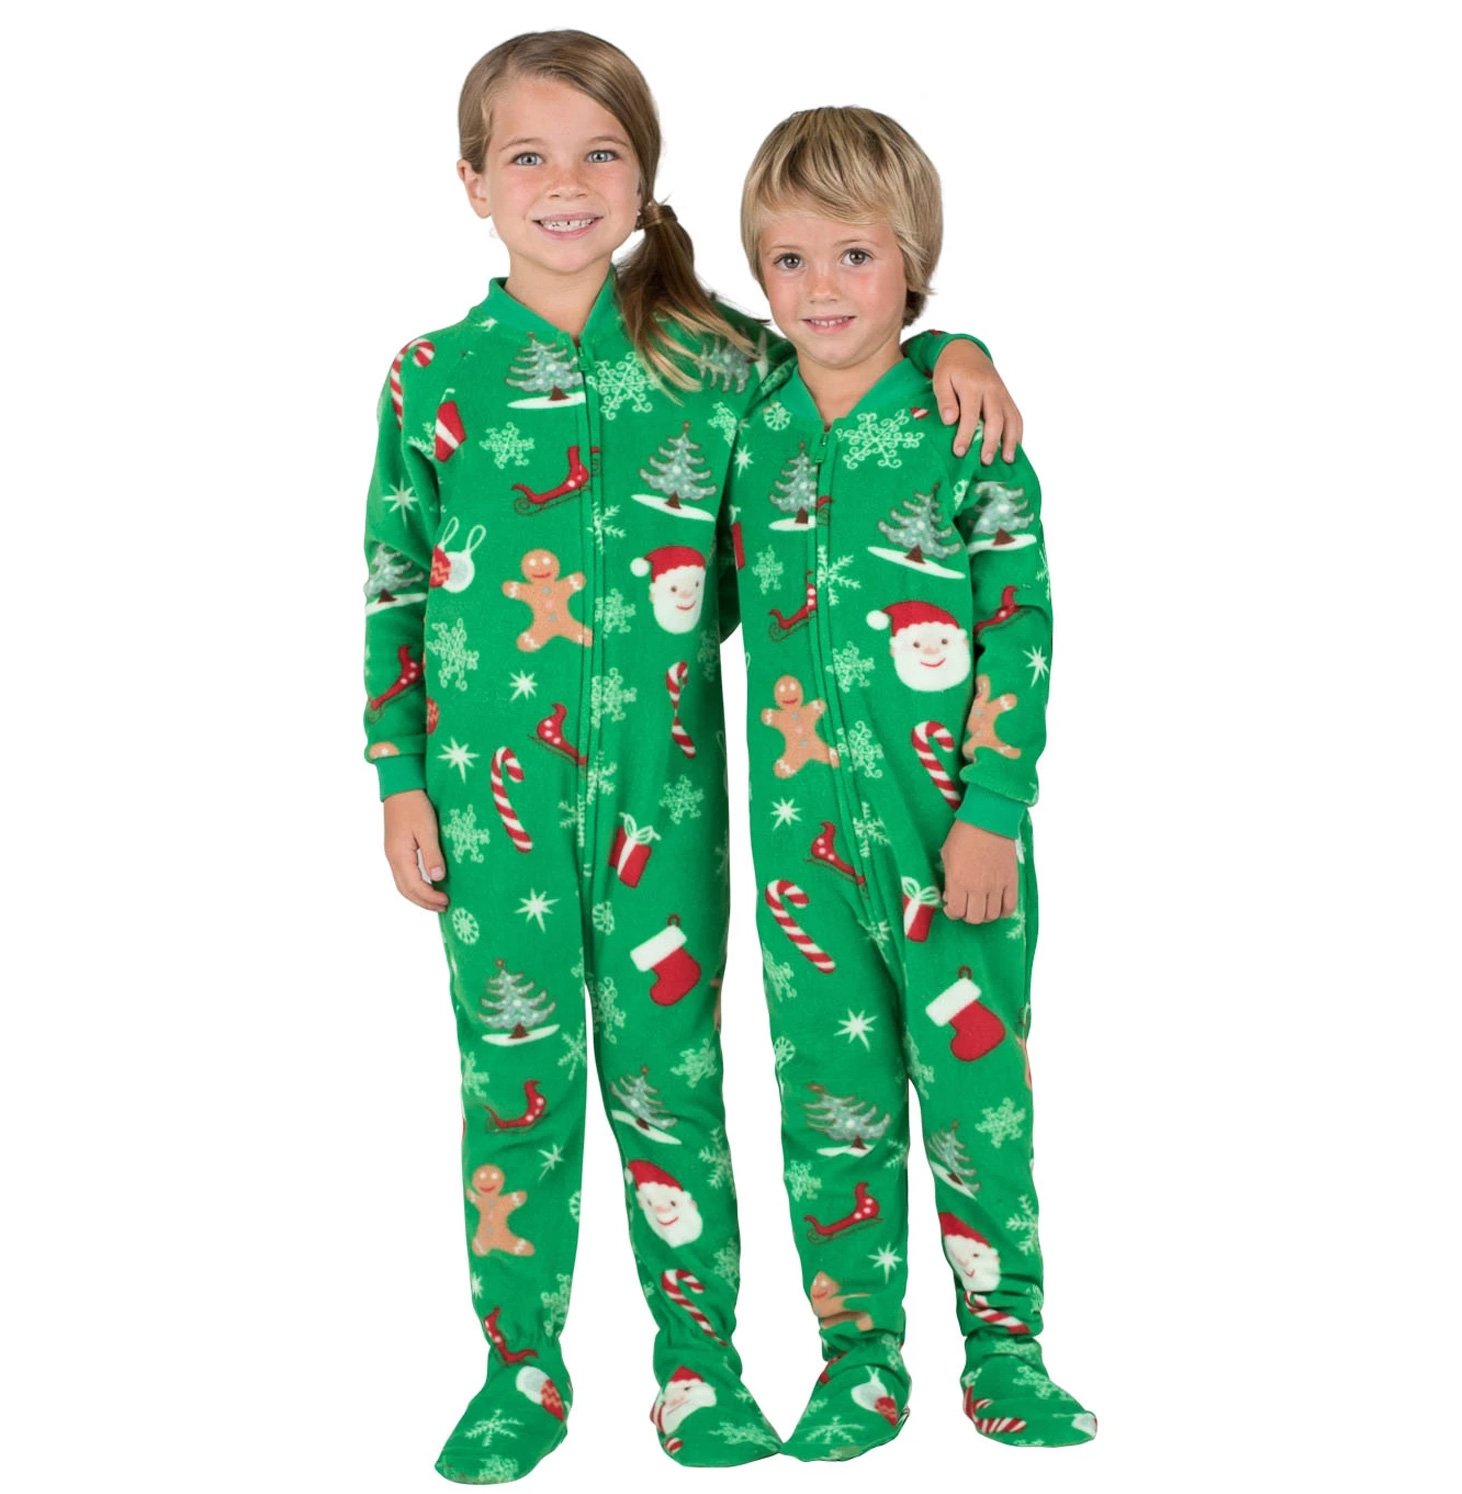 Footed Pajamas - Family Matching Green Christmas One Pieces for Boys, Girls, Men, Women and Pets - Pet - XLarge (Fits Up to 75 lbs) - image 5 of 7